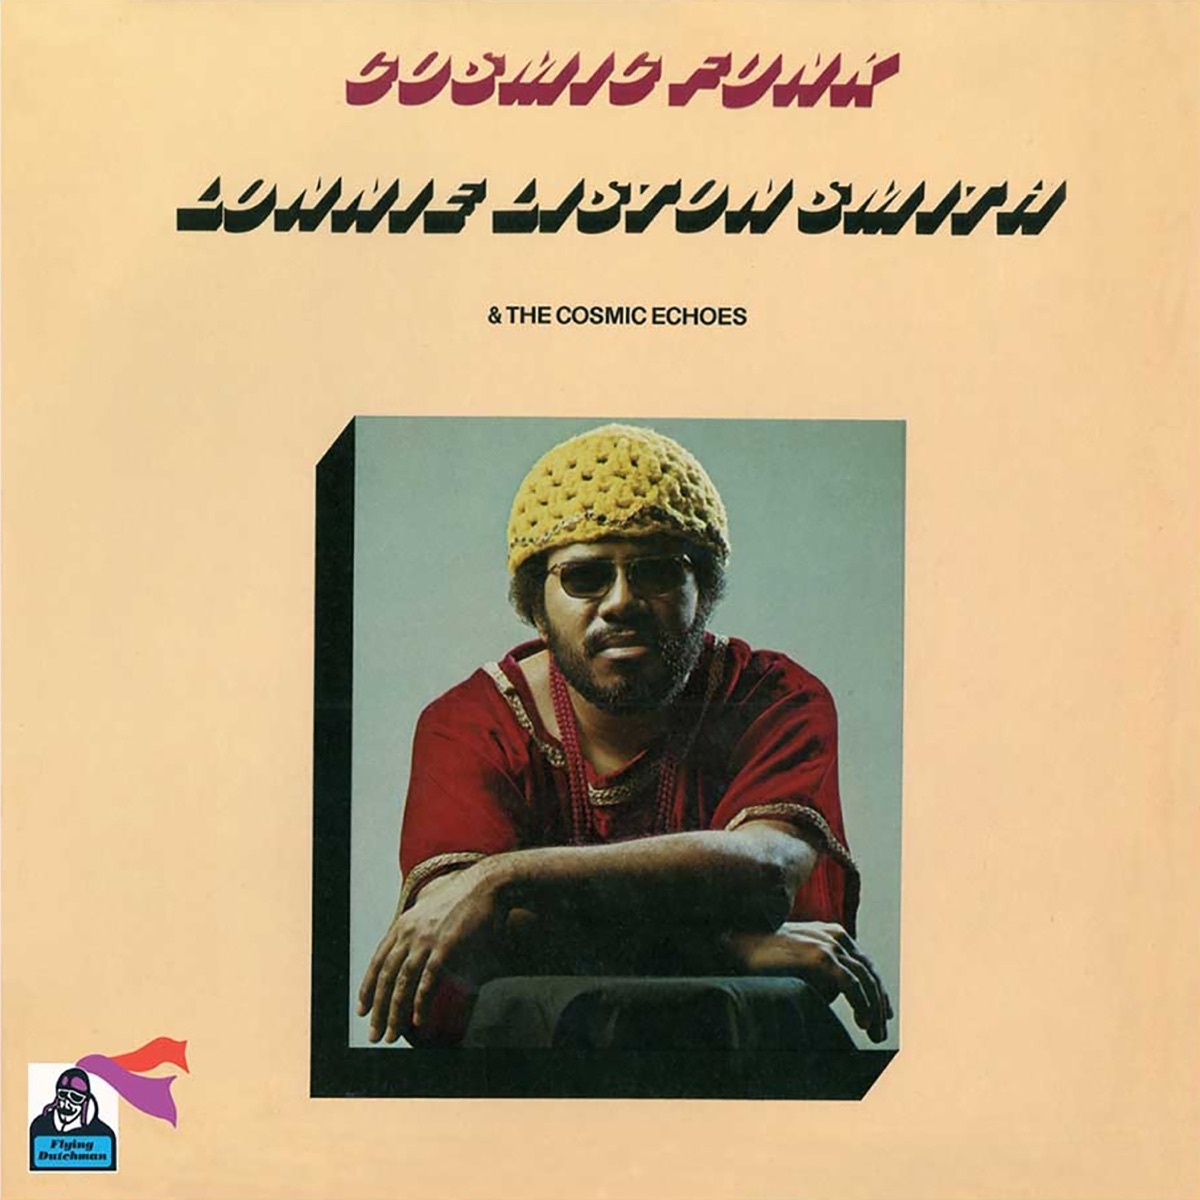 Astral Traveling - Album by Lonnie Liston Smith & The Cosmic 